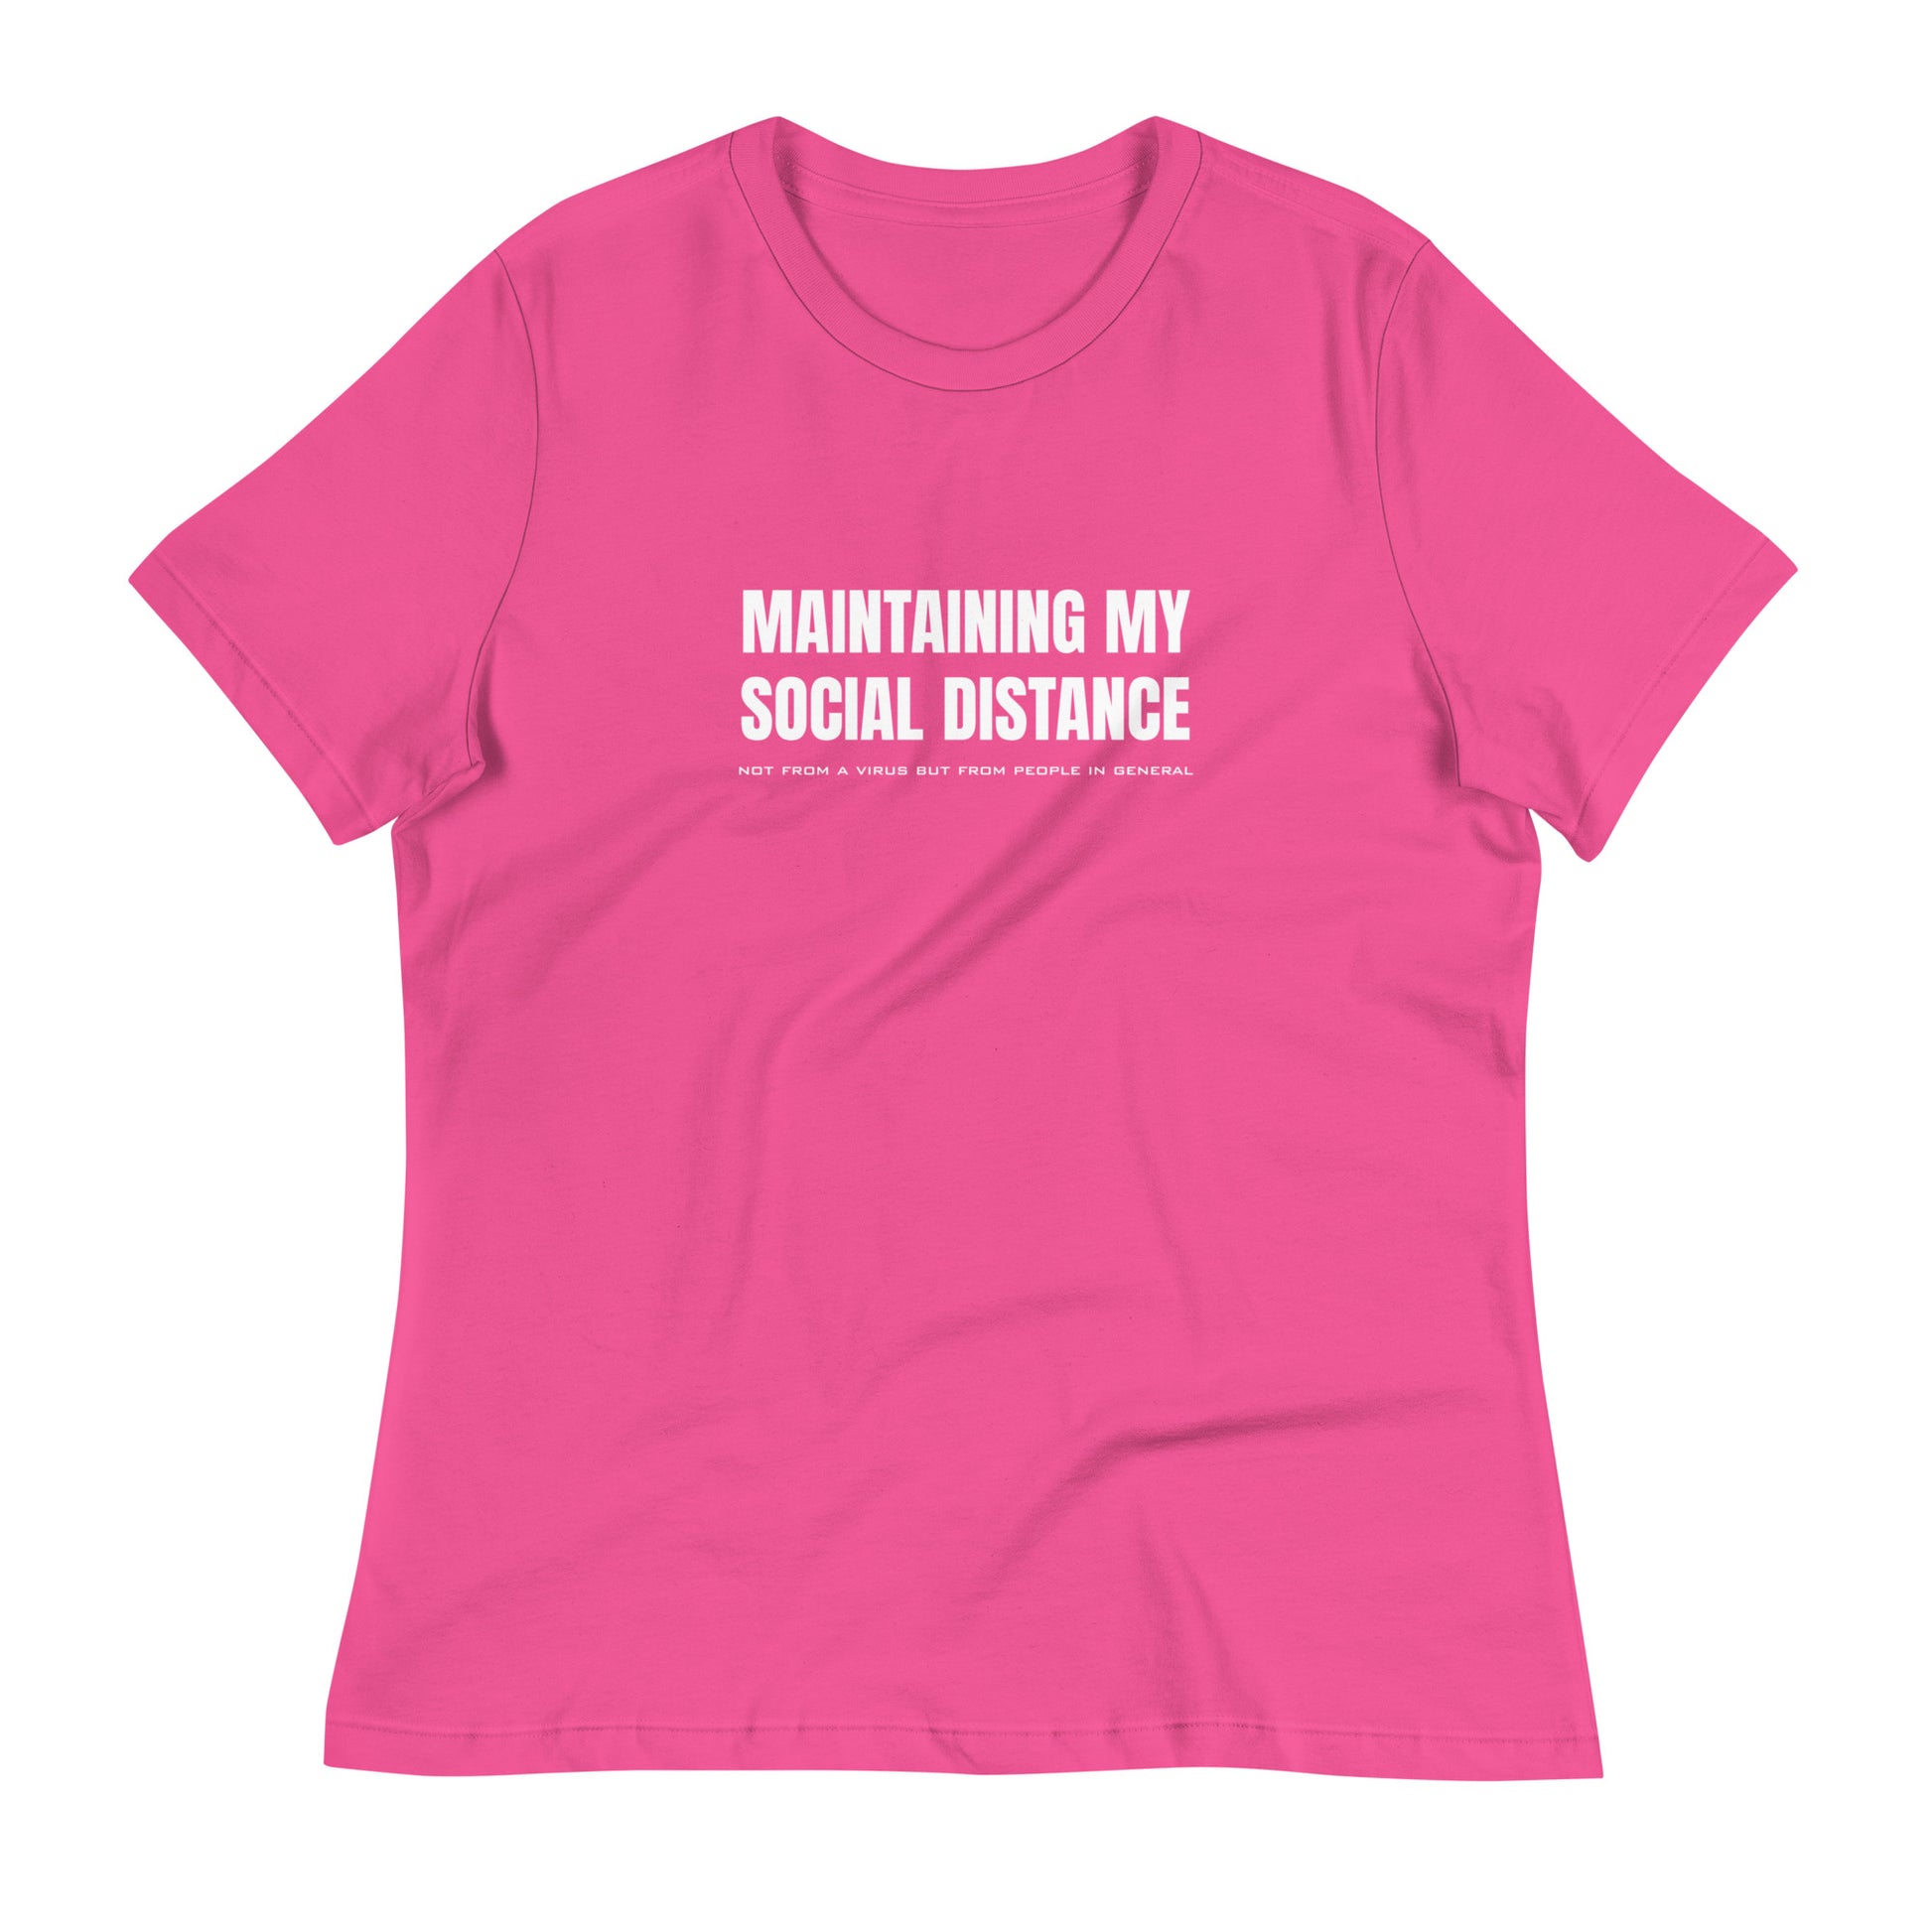 Berry (hot pink) women's relaxed fit t-shirt with white graphic: "MAINTAINING MY SOCIAL DISTANCE not from a virus but from people in general"